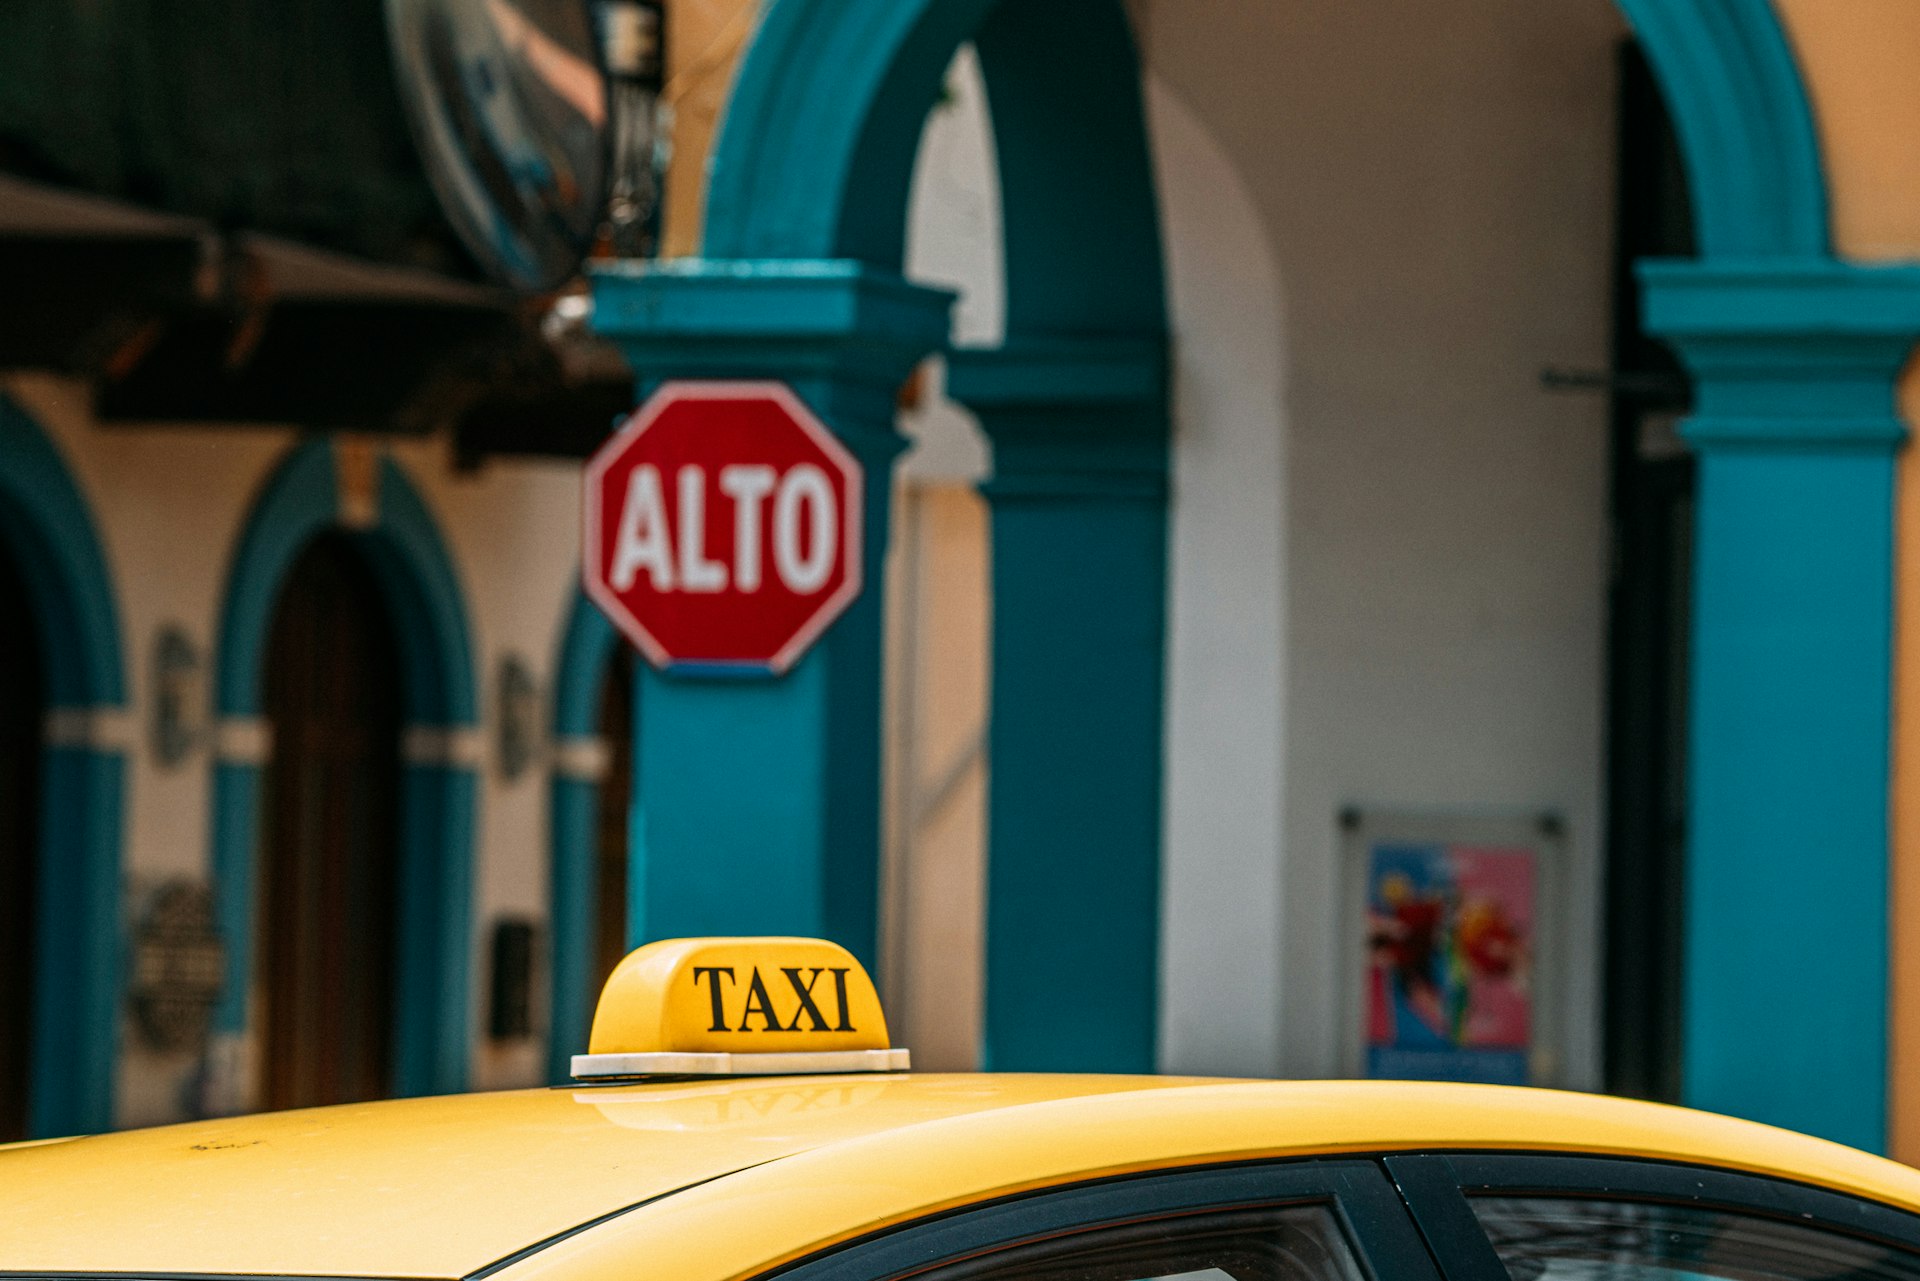 A taxi waiting outside a building in Panama City